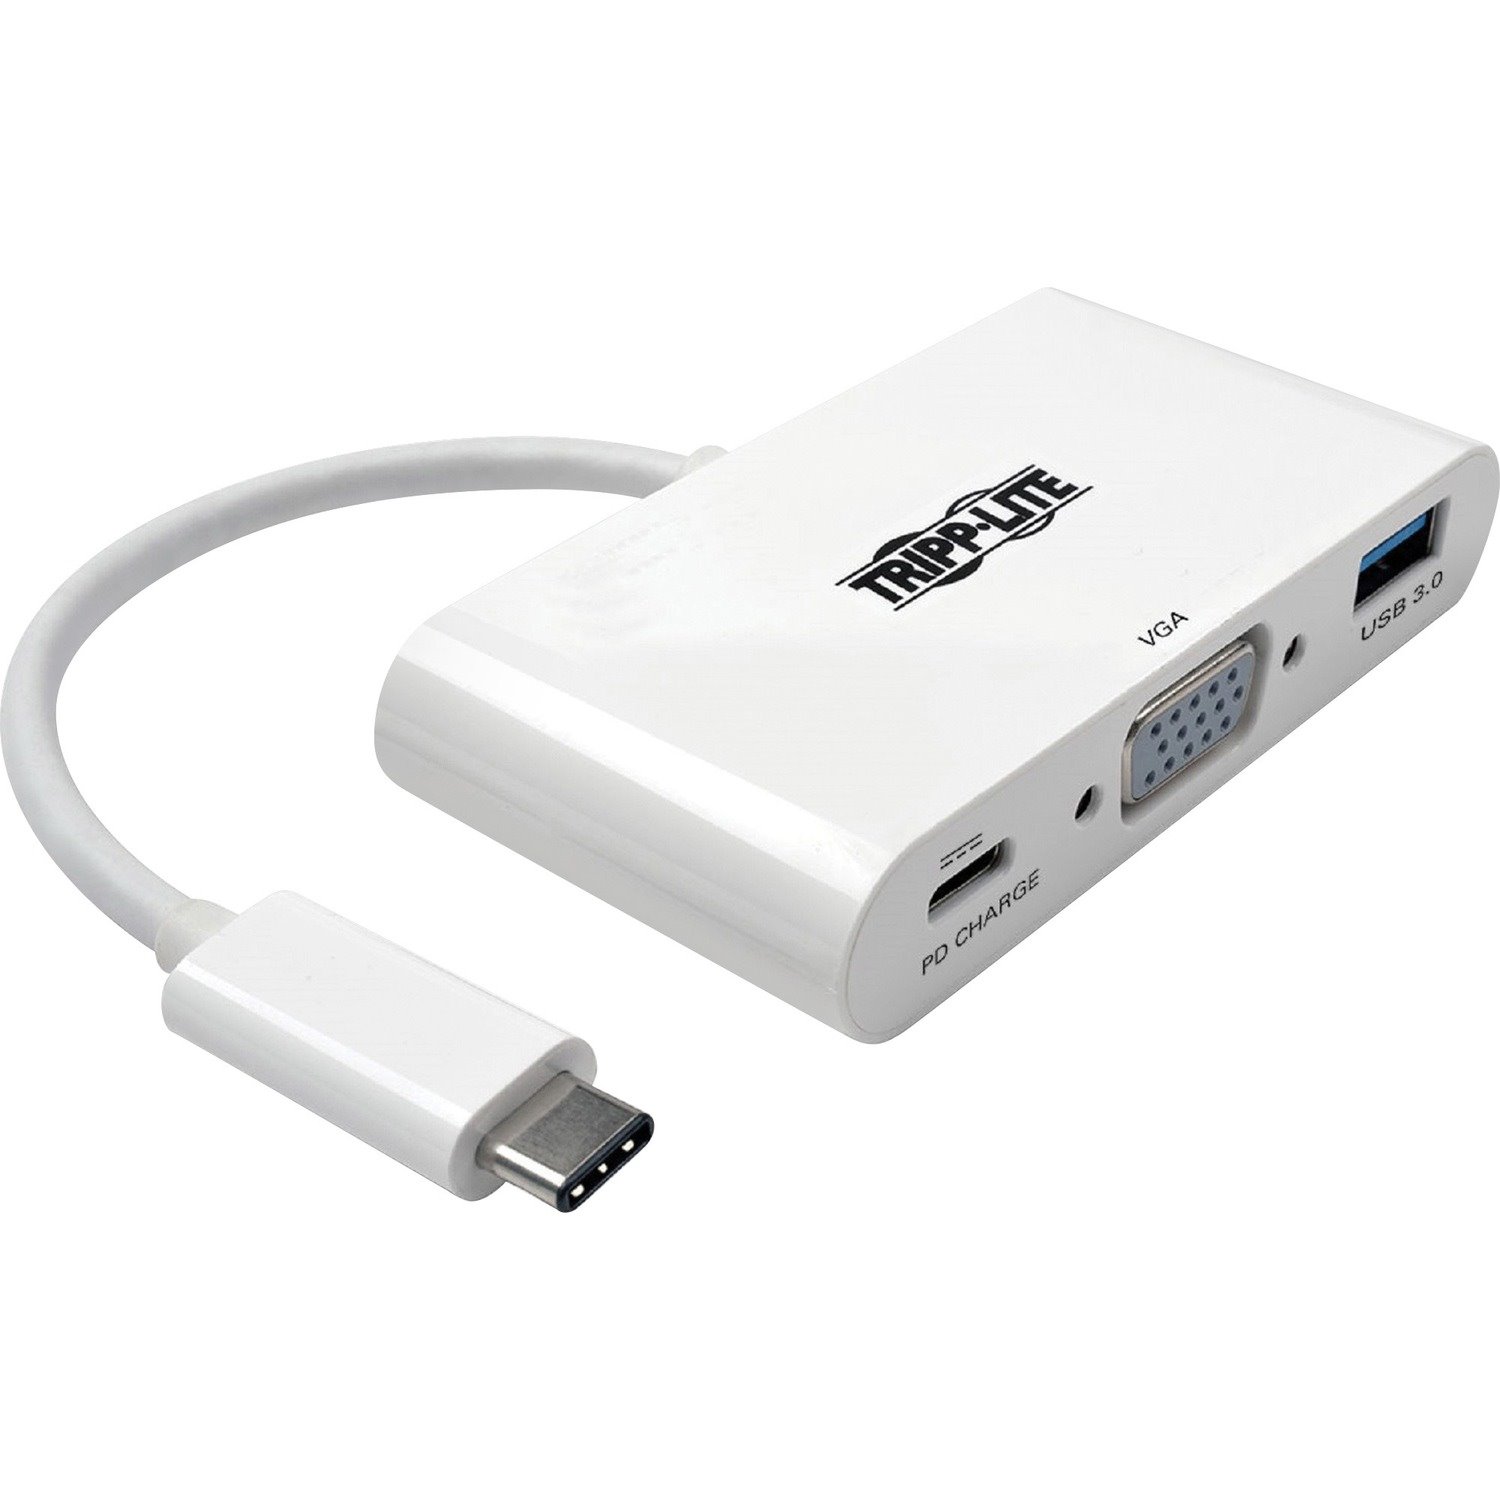 Eaton Tripp Lite Series USB-C to VGA Adapter with USB 3.x (5Gbps) Hub Ports and 60W PD Charging, White